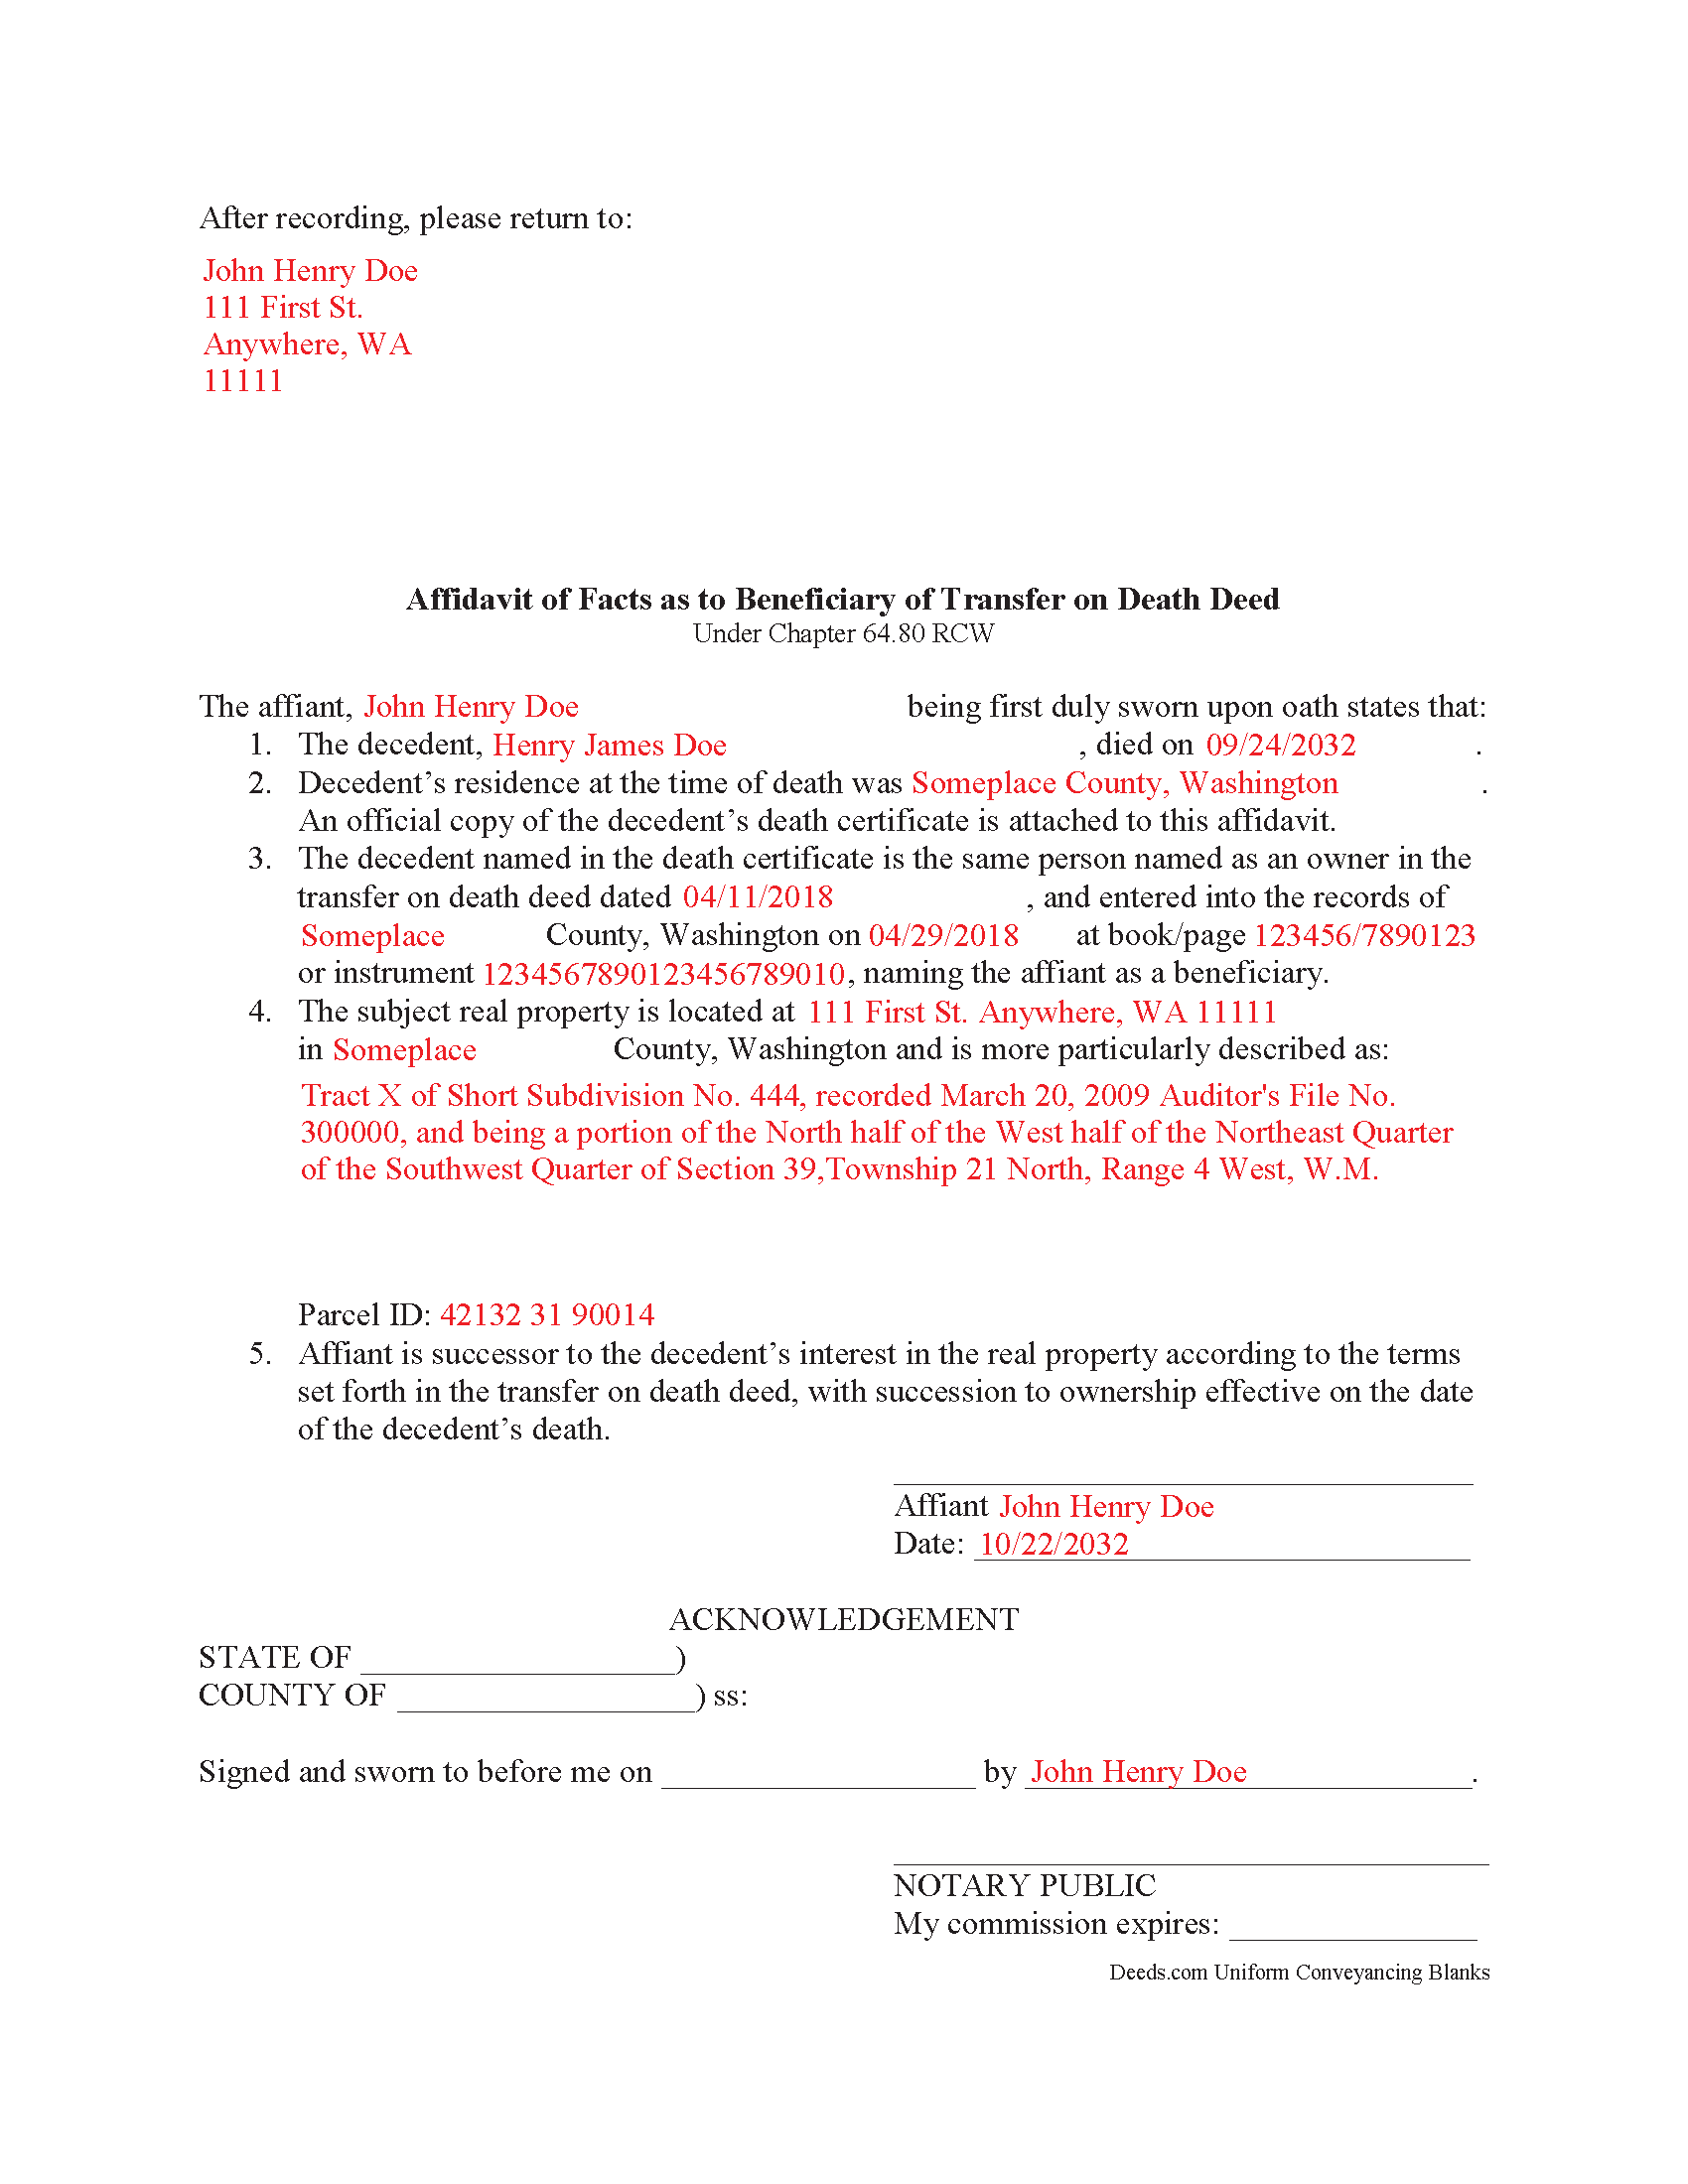 Completed Example of the Transfer on Death Affidavit Document